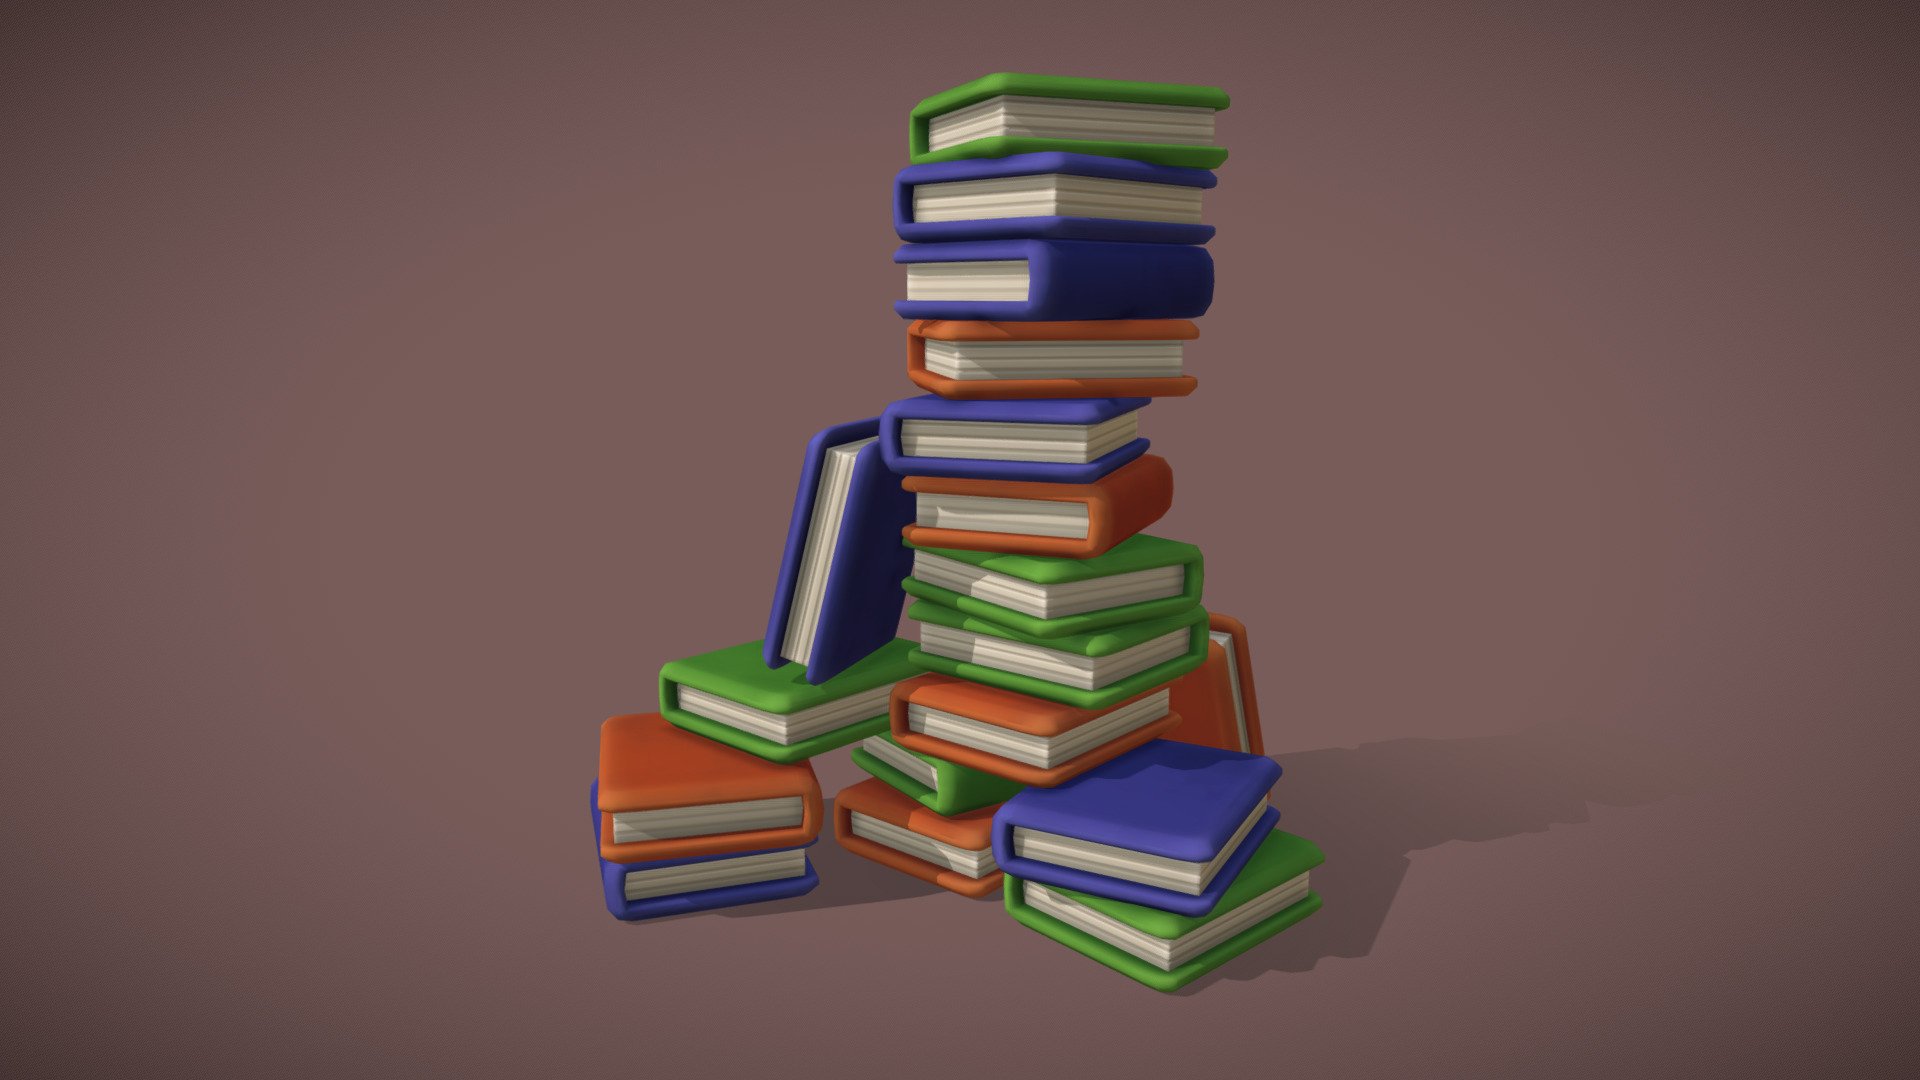 Made with Blender and Substance Painter 📚
Low poly books with 512x512 textures (albedo, normal, roughness) - Stack of Books - 3D model by Andréa (@Andrea_L) 3d model